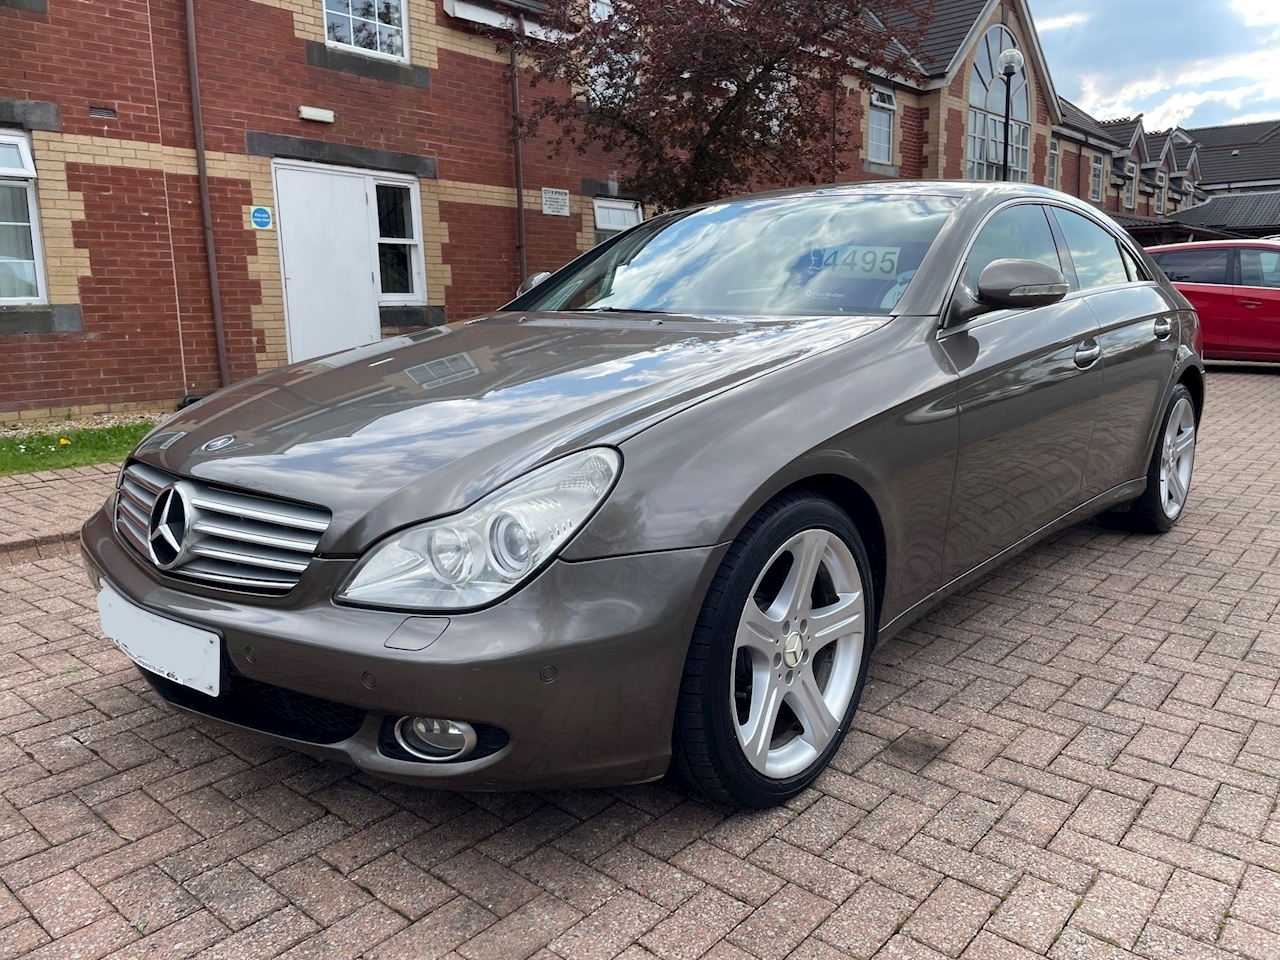 3.0 CLS320 CDI Coupe 4dr Diesel 7G-Tronic (200 g/km, 221 bhp)